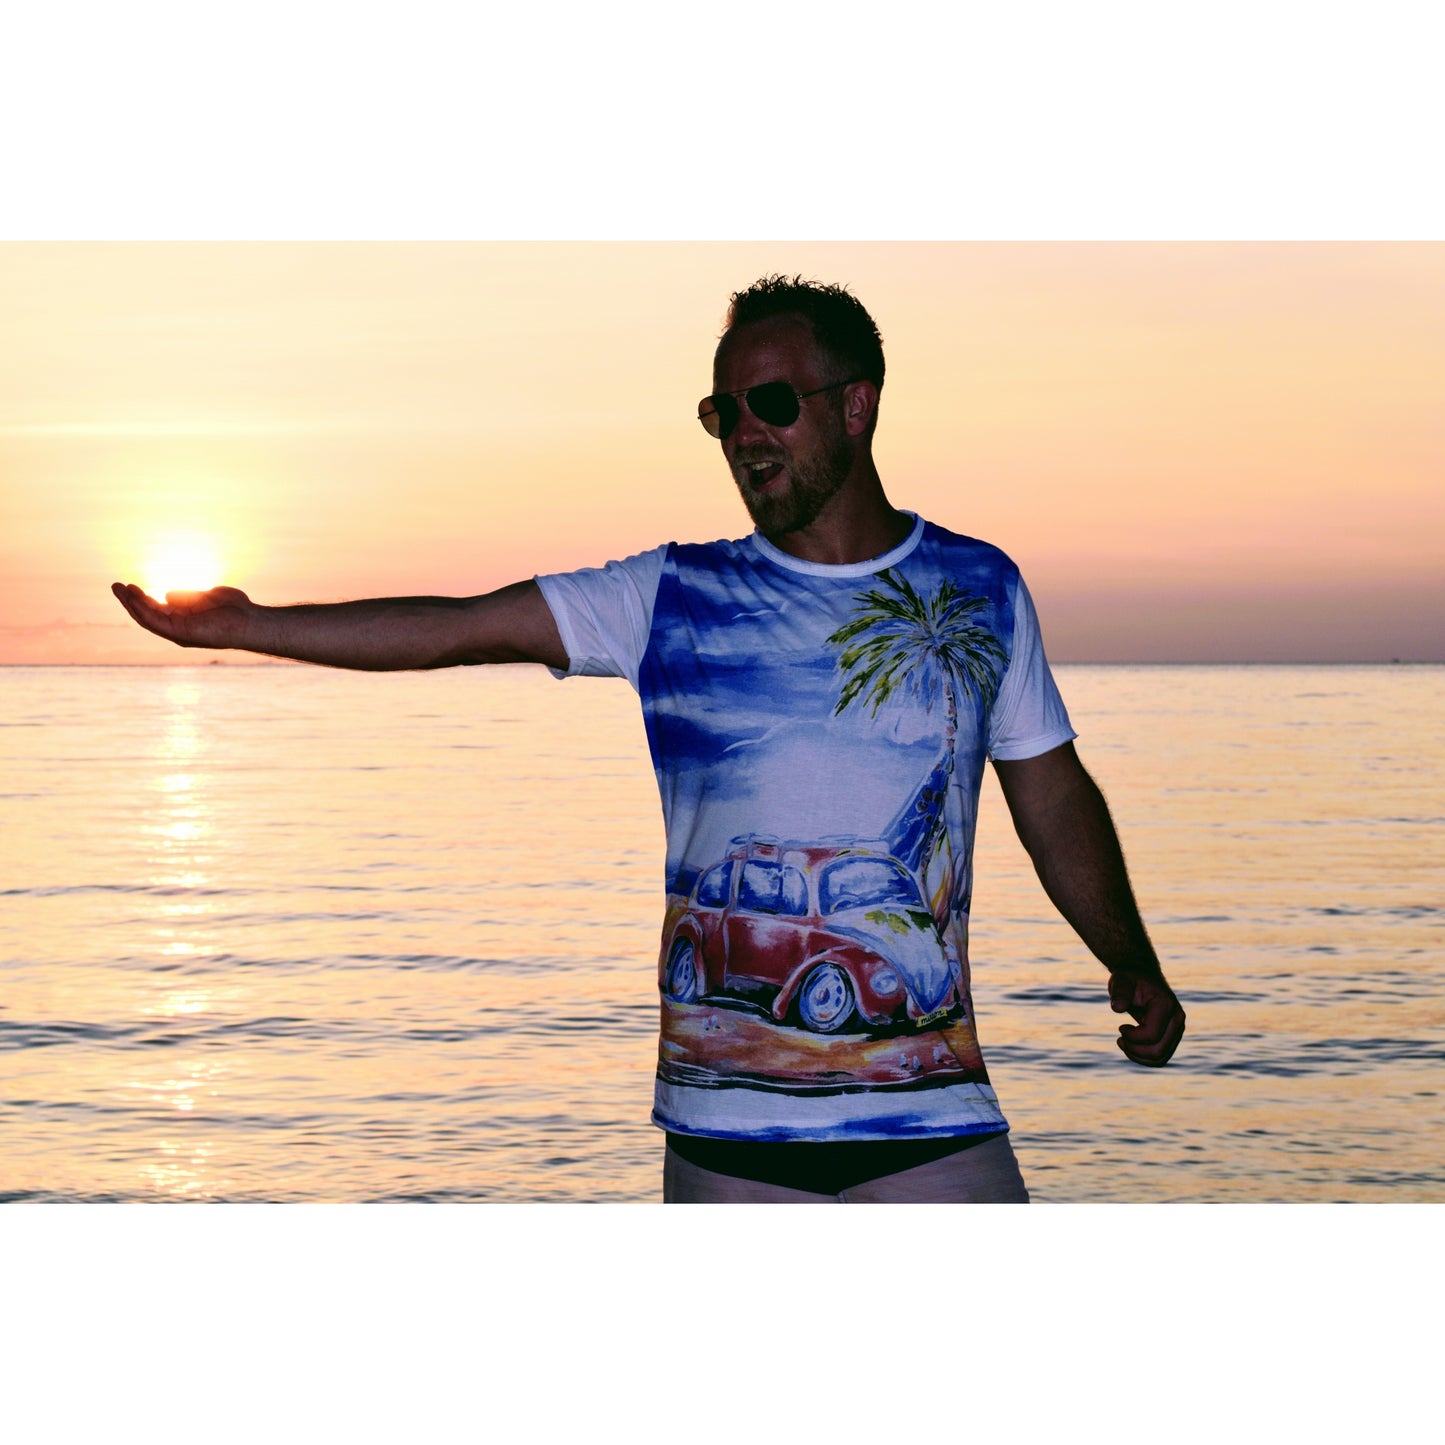 Bug at the Beach Men's T-shirt By Mirror Brand